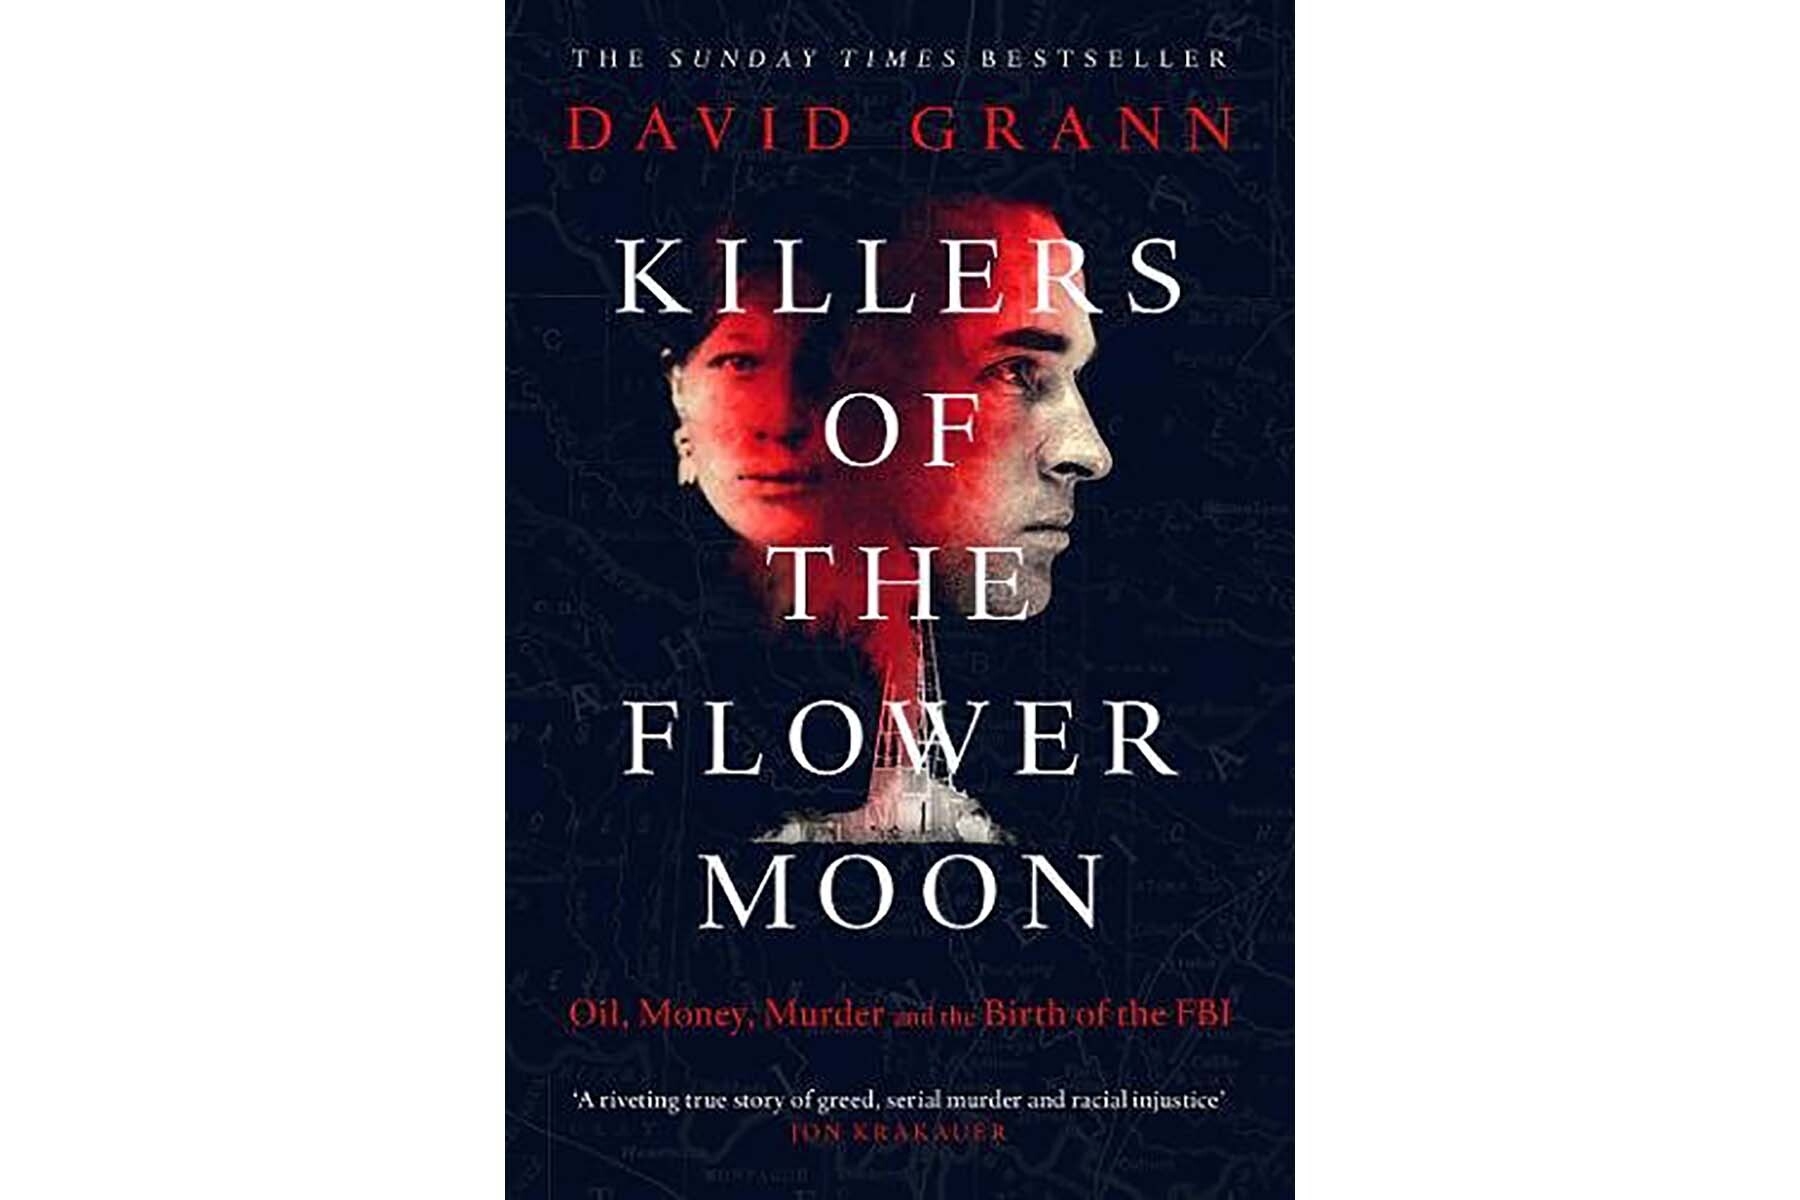 Book cover for "Killers of the Flower Moon" - a woman's face on the left, a man's profile on the right. Both faces have a red tone of them. The background is black, and title text is white. 